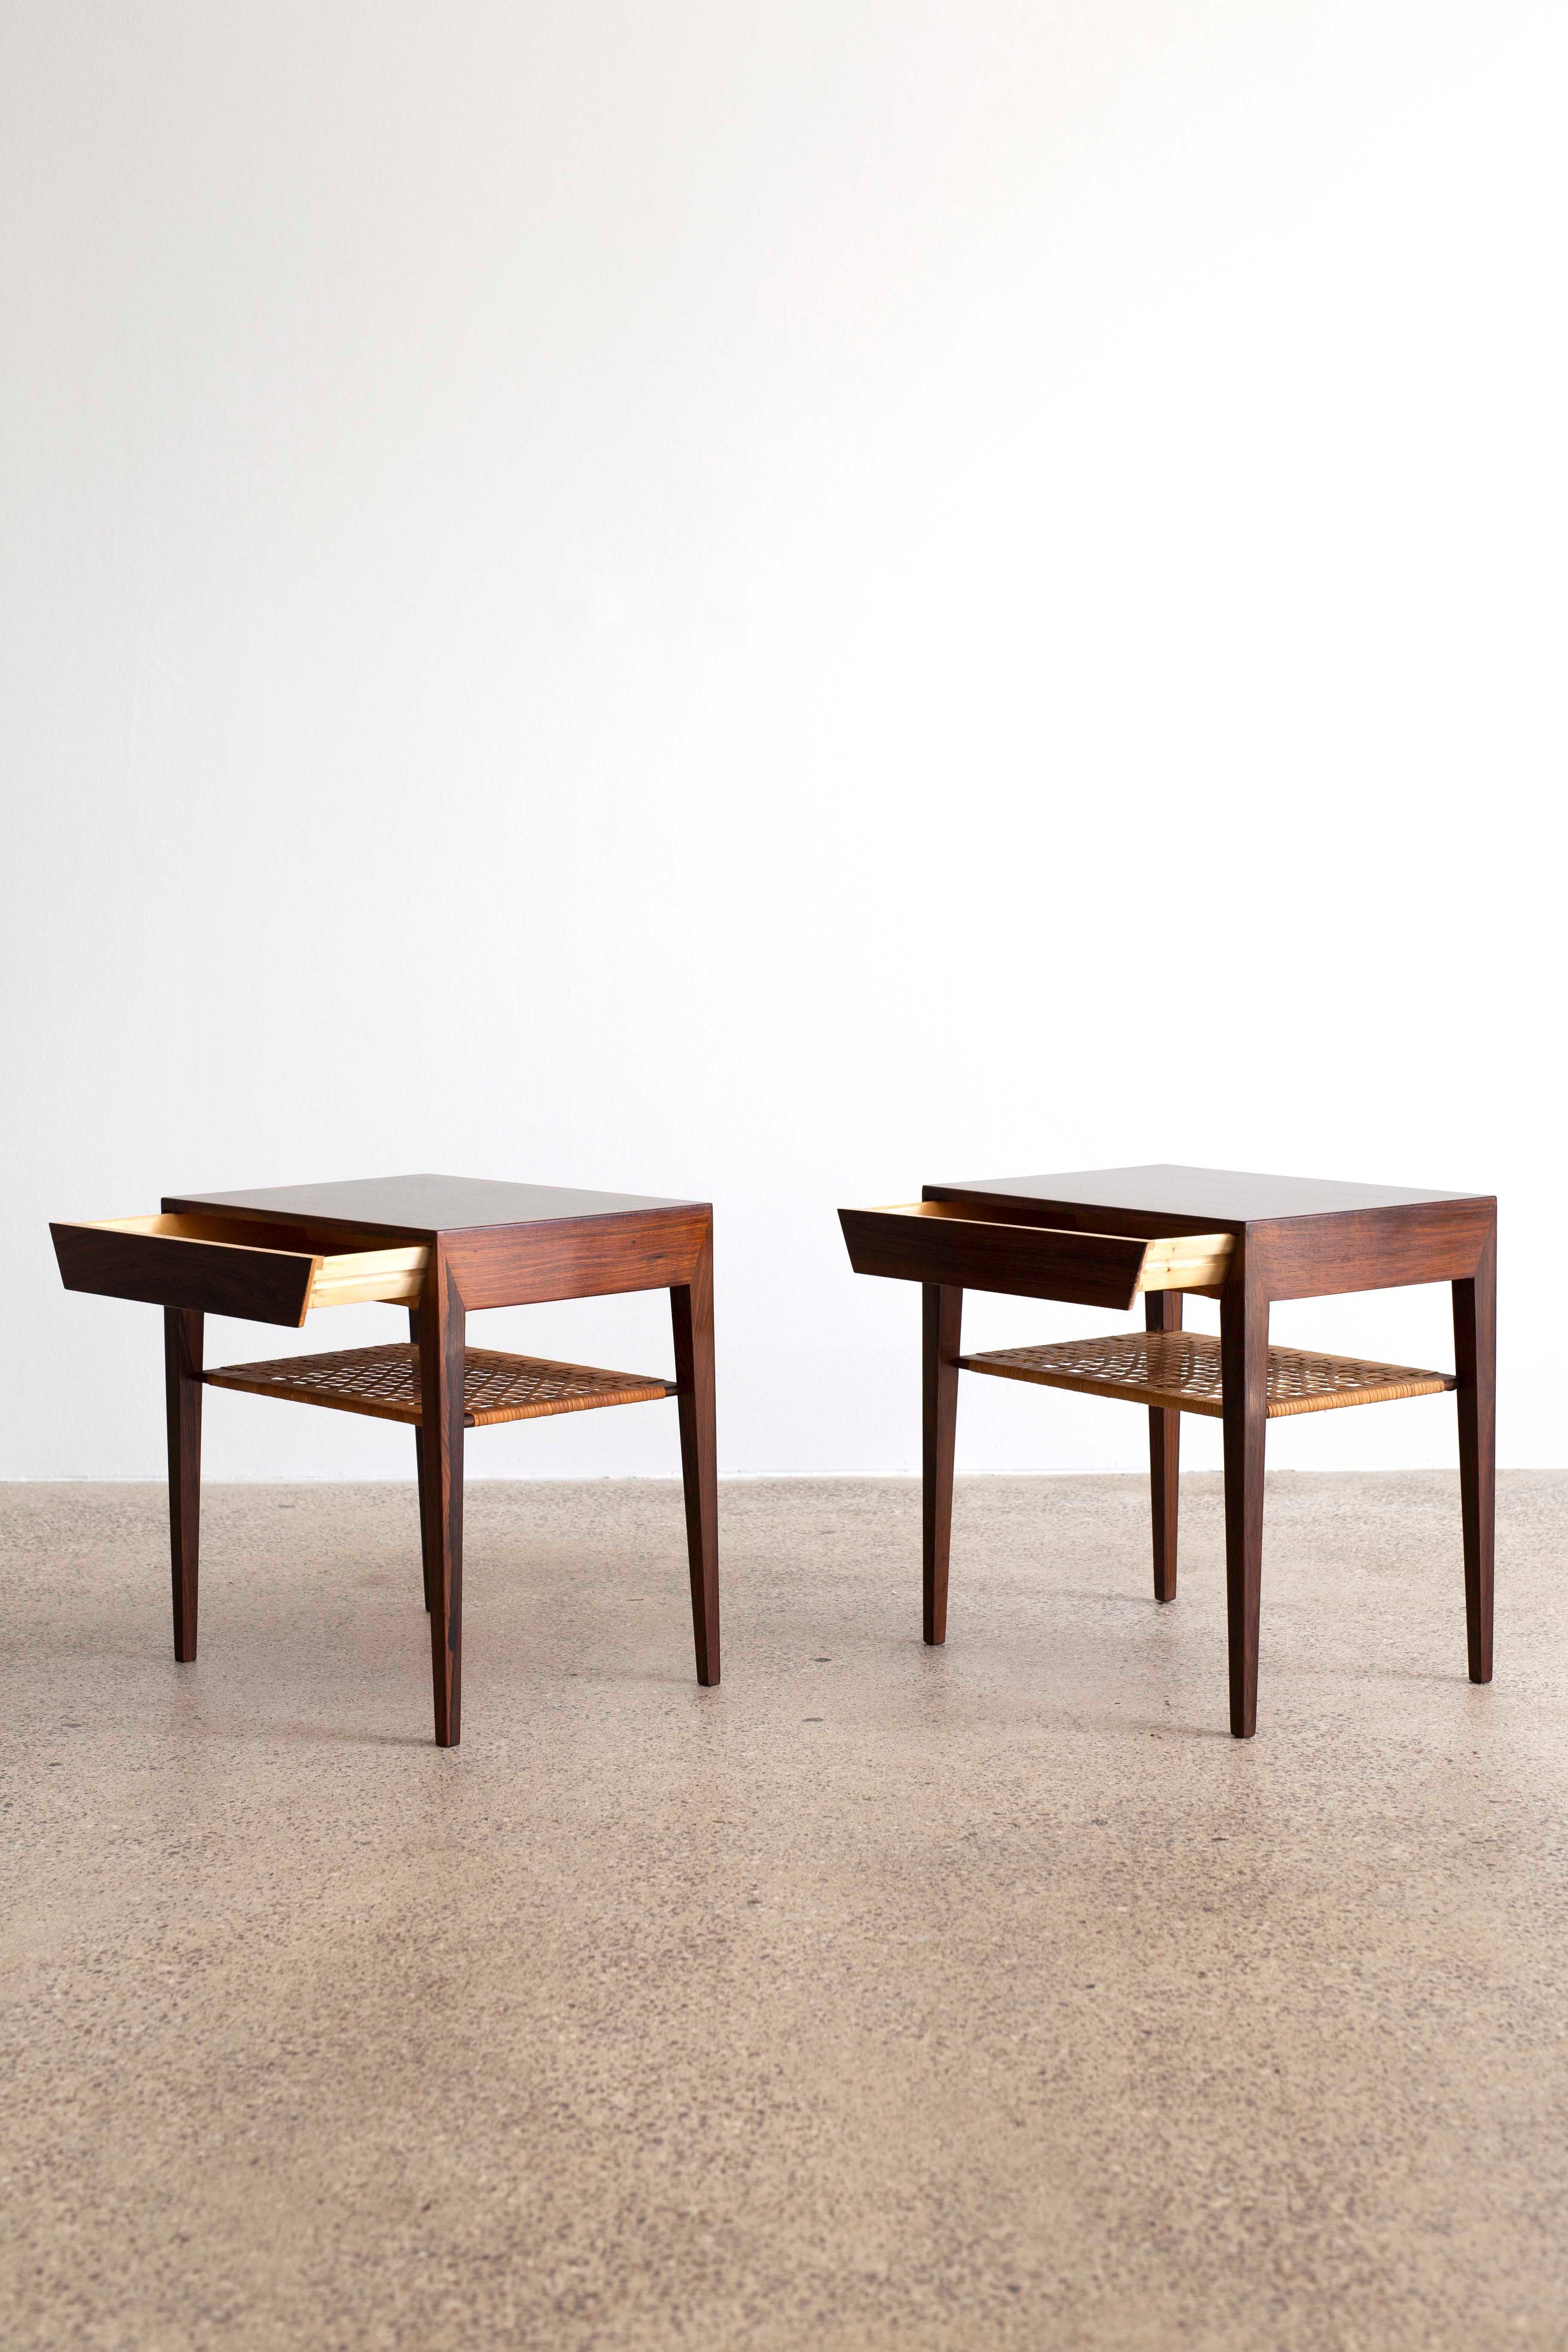 A pair of Severin Hansen side tables in rosewood with cane shelf and drawer. Designed by Severin Hansen 1960s and made at Haslev møbelsnedkeri in Denmark. Very fine condition.